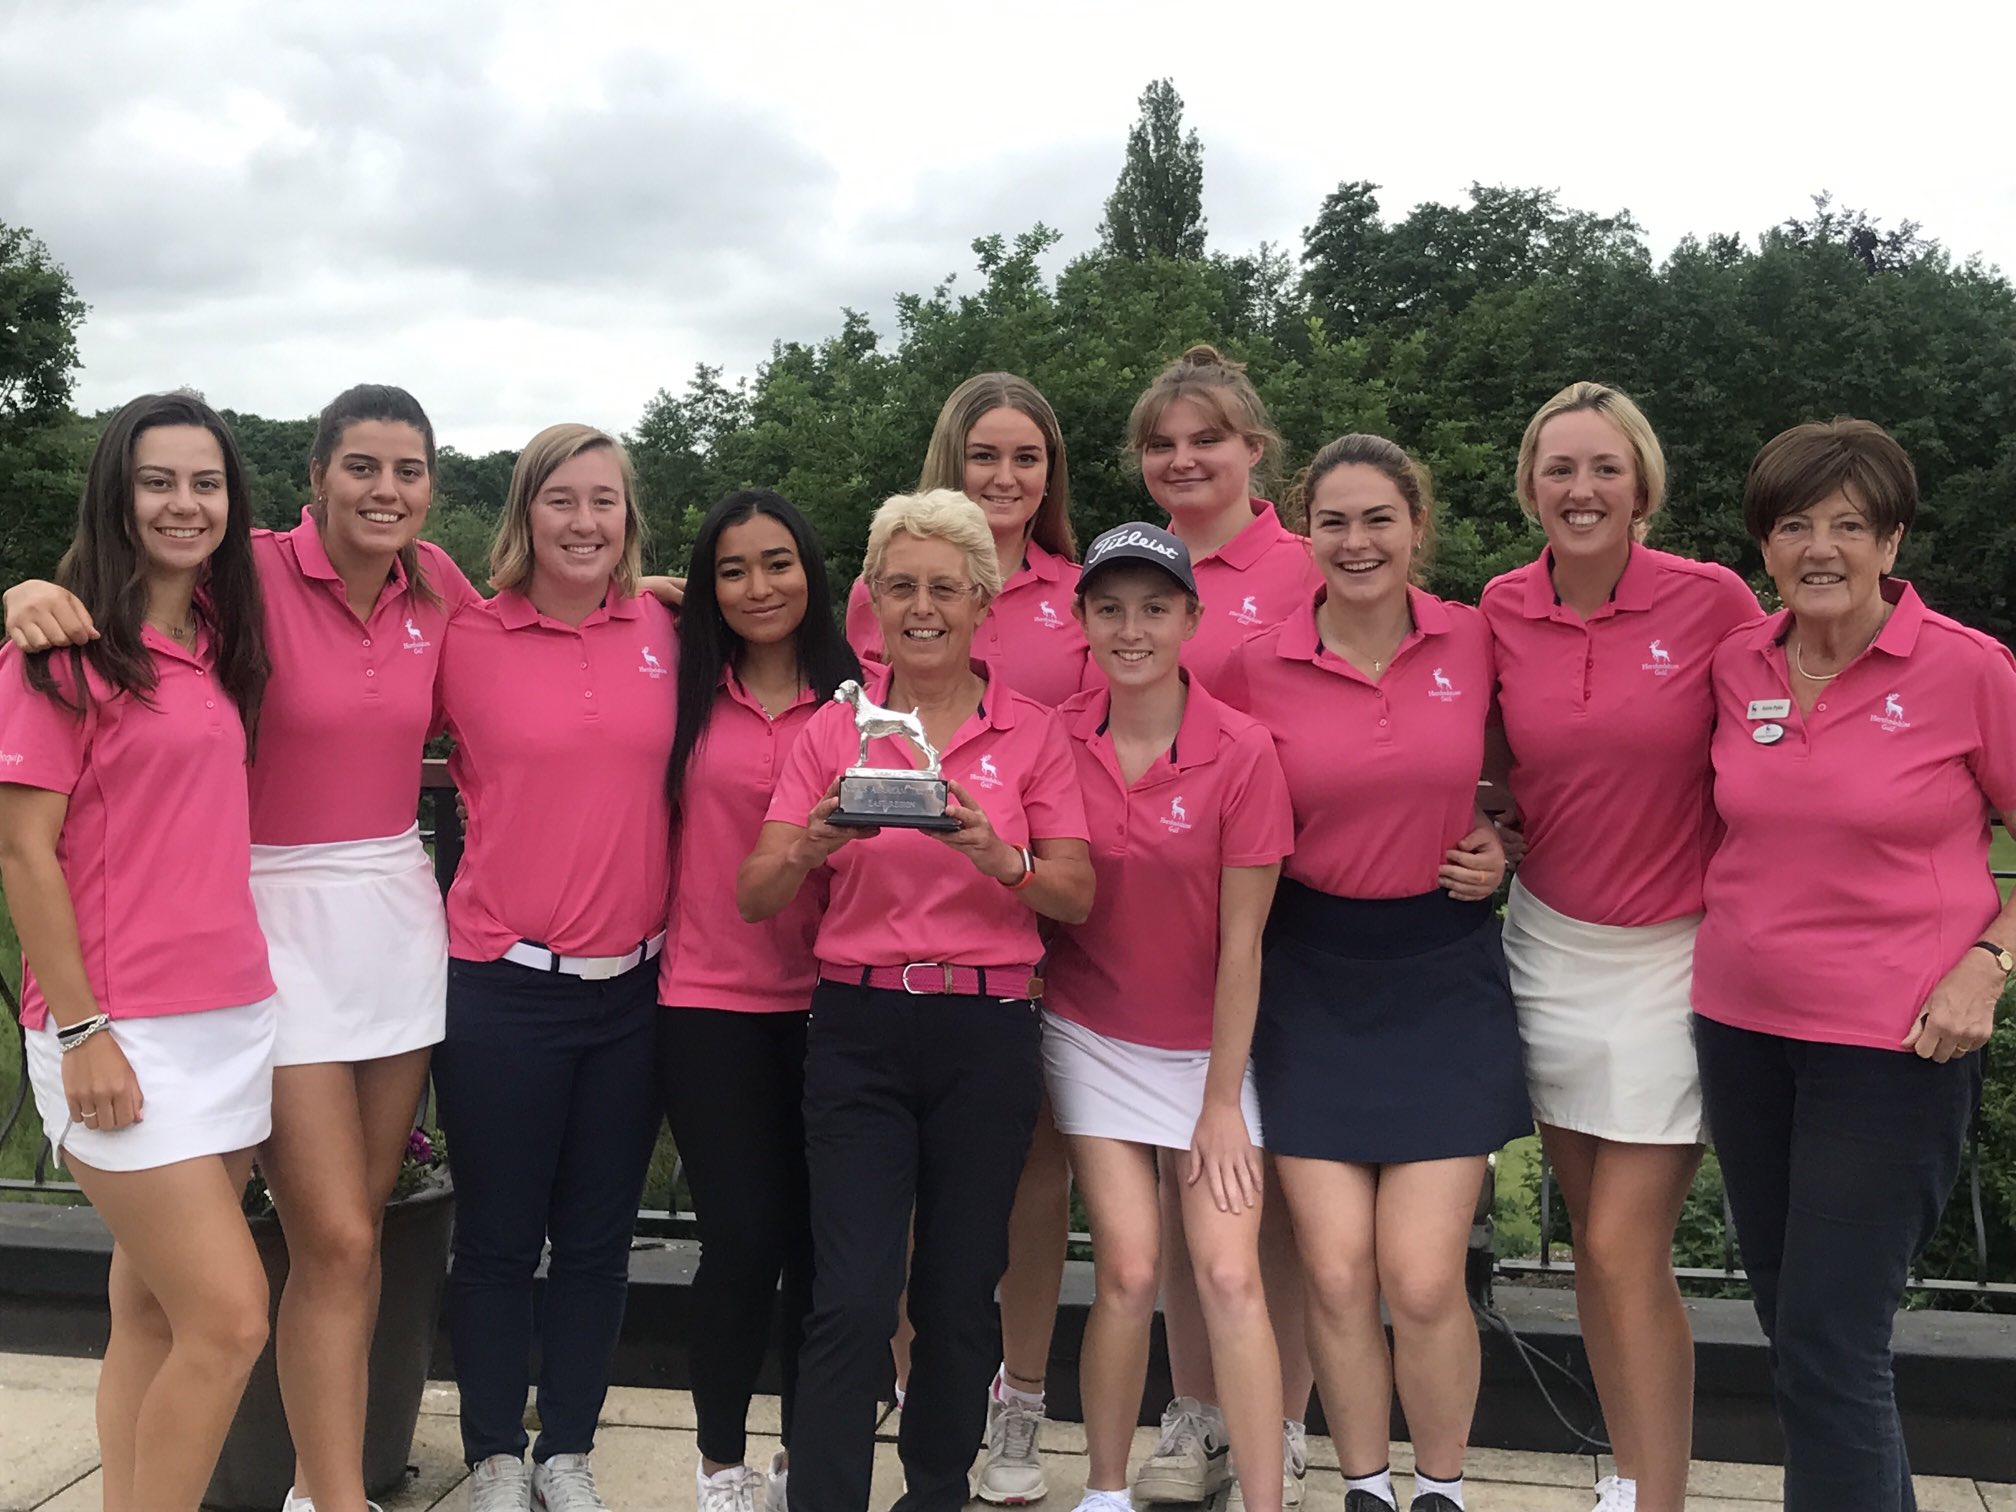 The winning Hertfordshire squad, from the left, back row: Maddie Rolfe, Millie Pratten. Front row: Rebecca Earl, Honor Kielty, Ellen Hume, Zainab Jeppe, Julie Nedza (vice captain), Emmanuelle Hewson, Ellie Farwell, Mawgan Vater, Anne Pyke (county president)